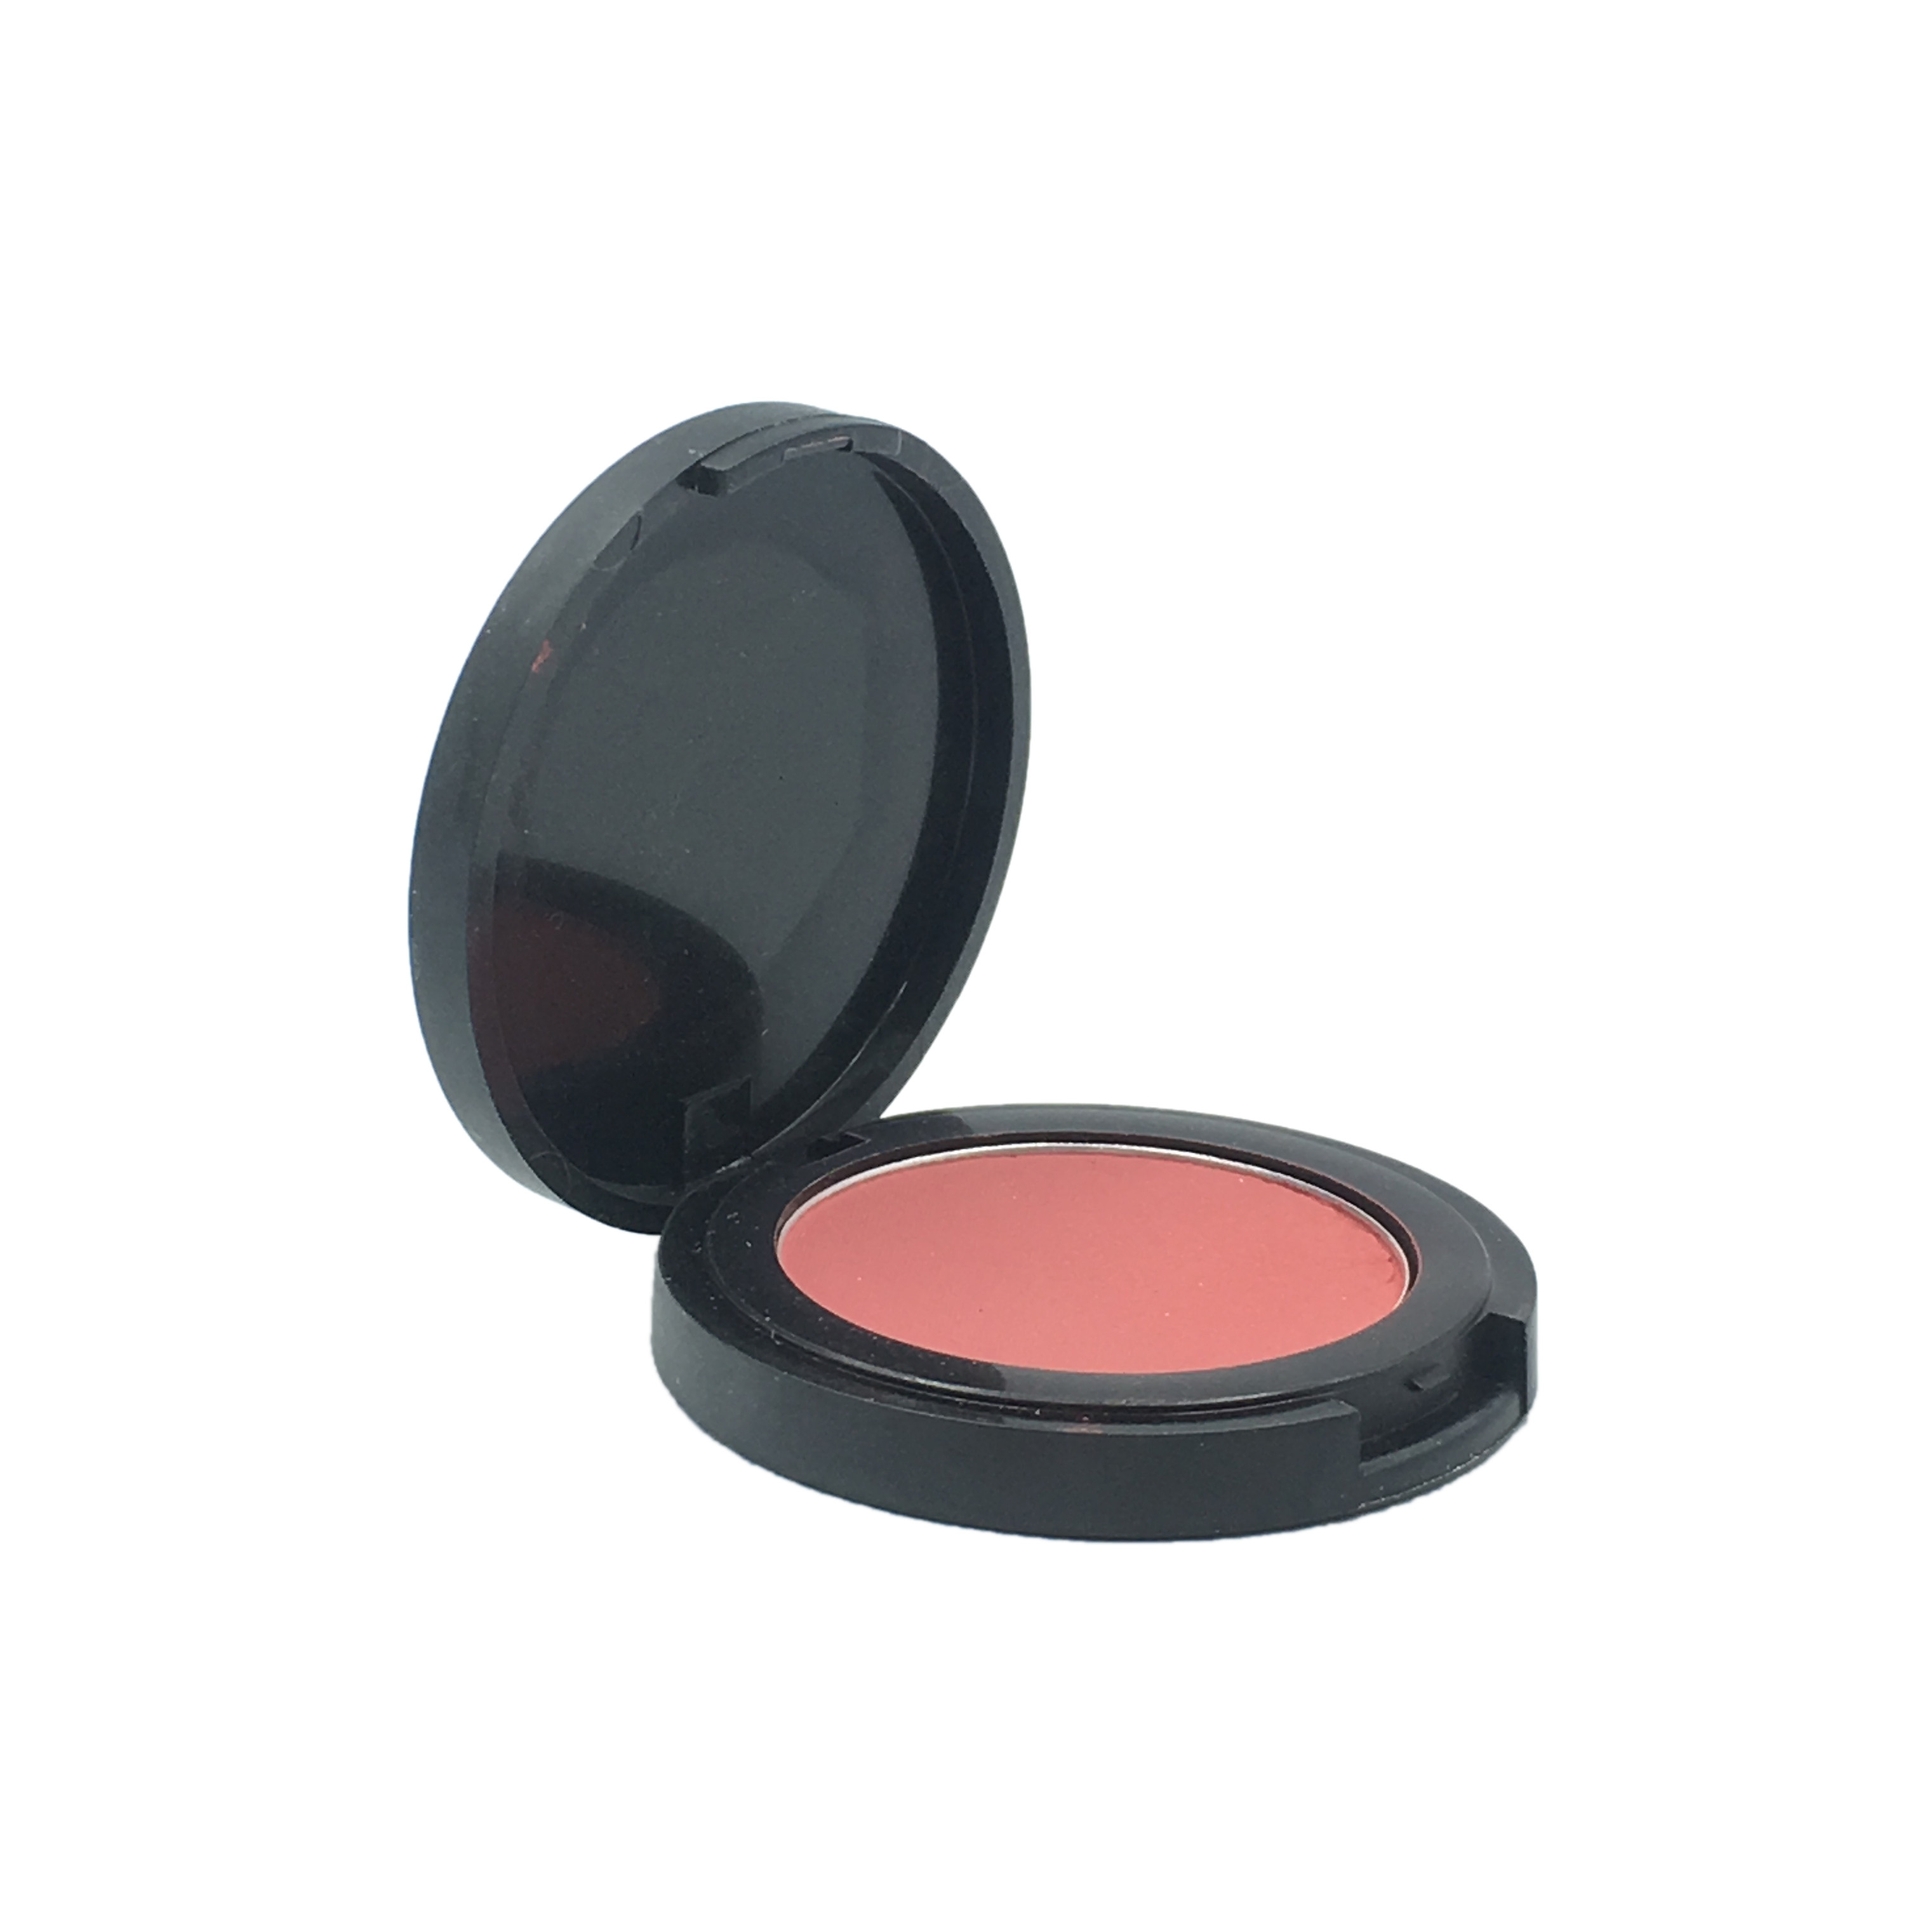 Focallure B11 Natural Beauty Blush On Faces